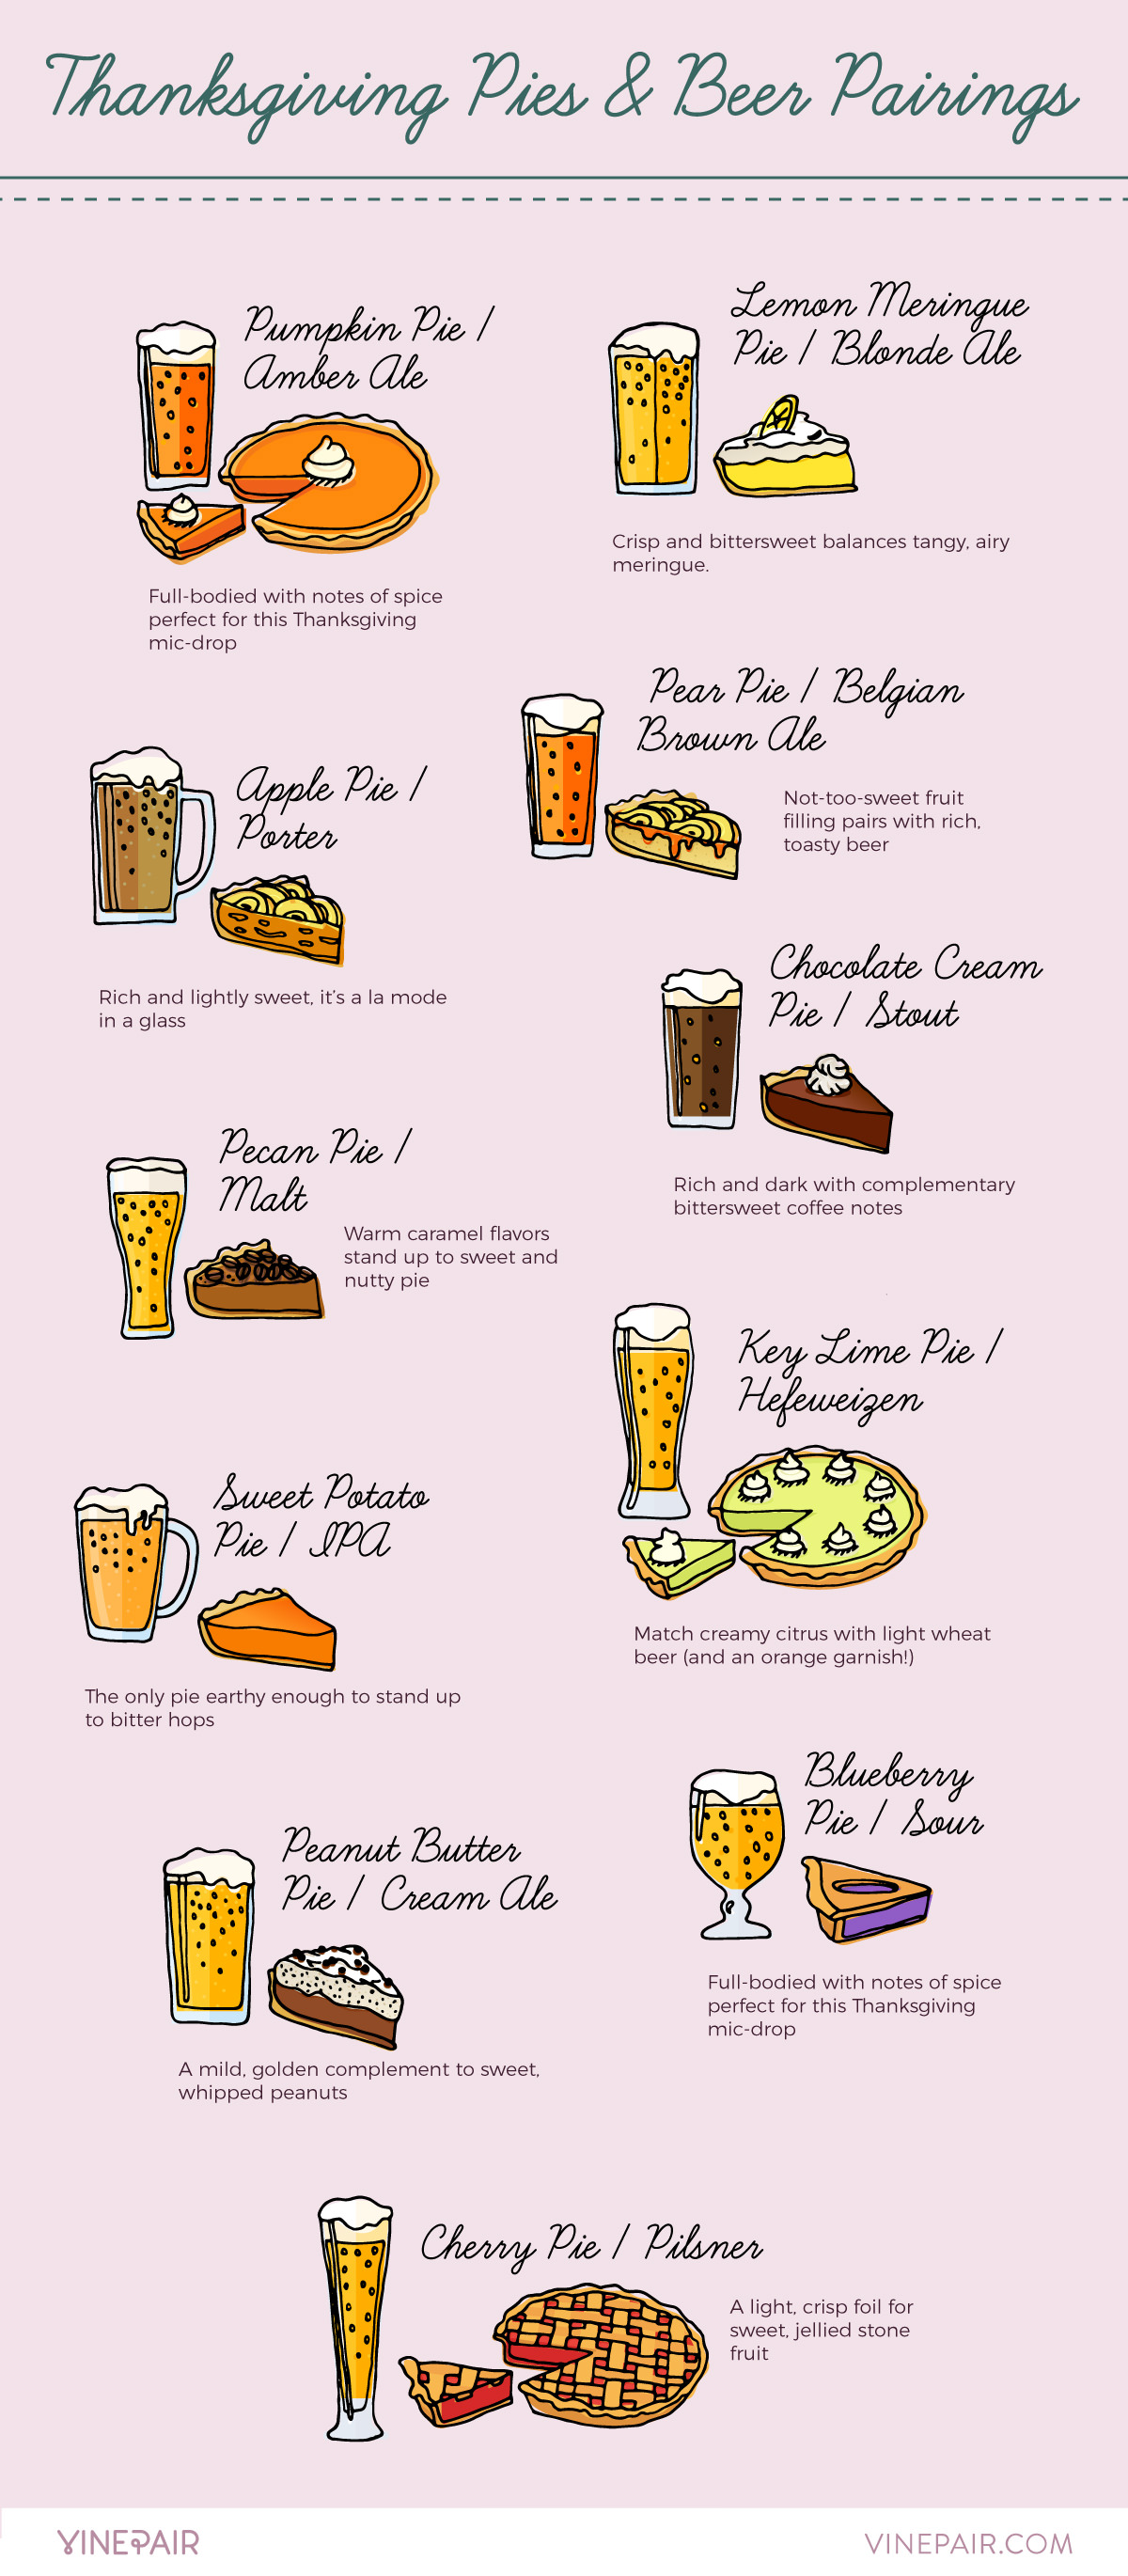 11 Favorite Thanksgiving Pies Paired With Beer